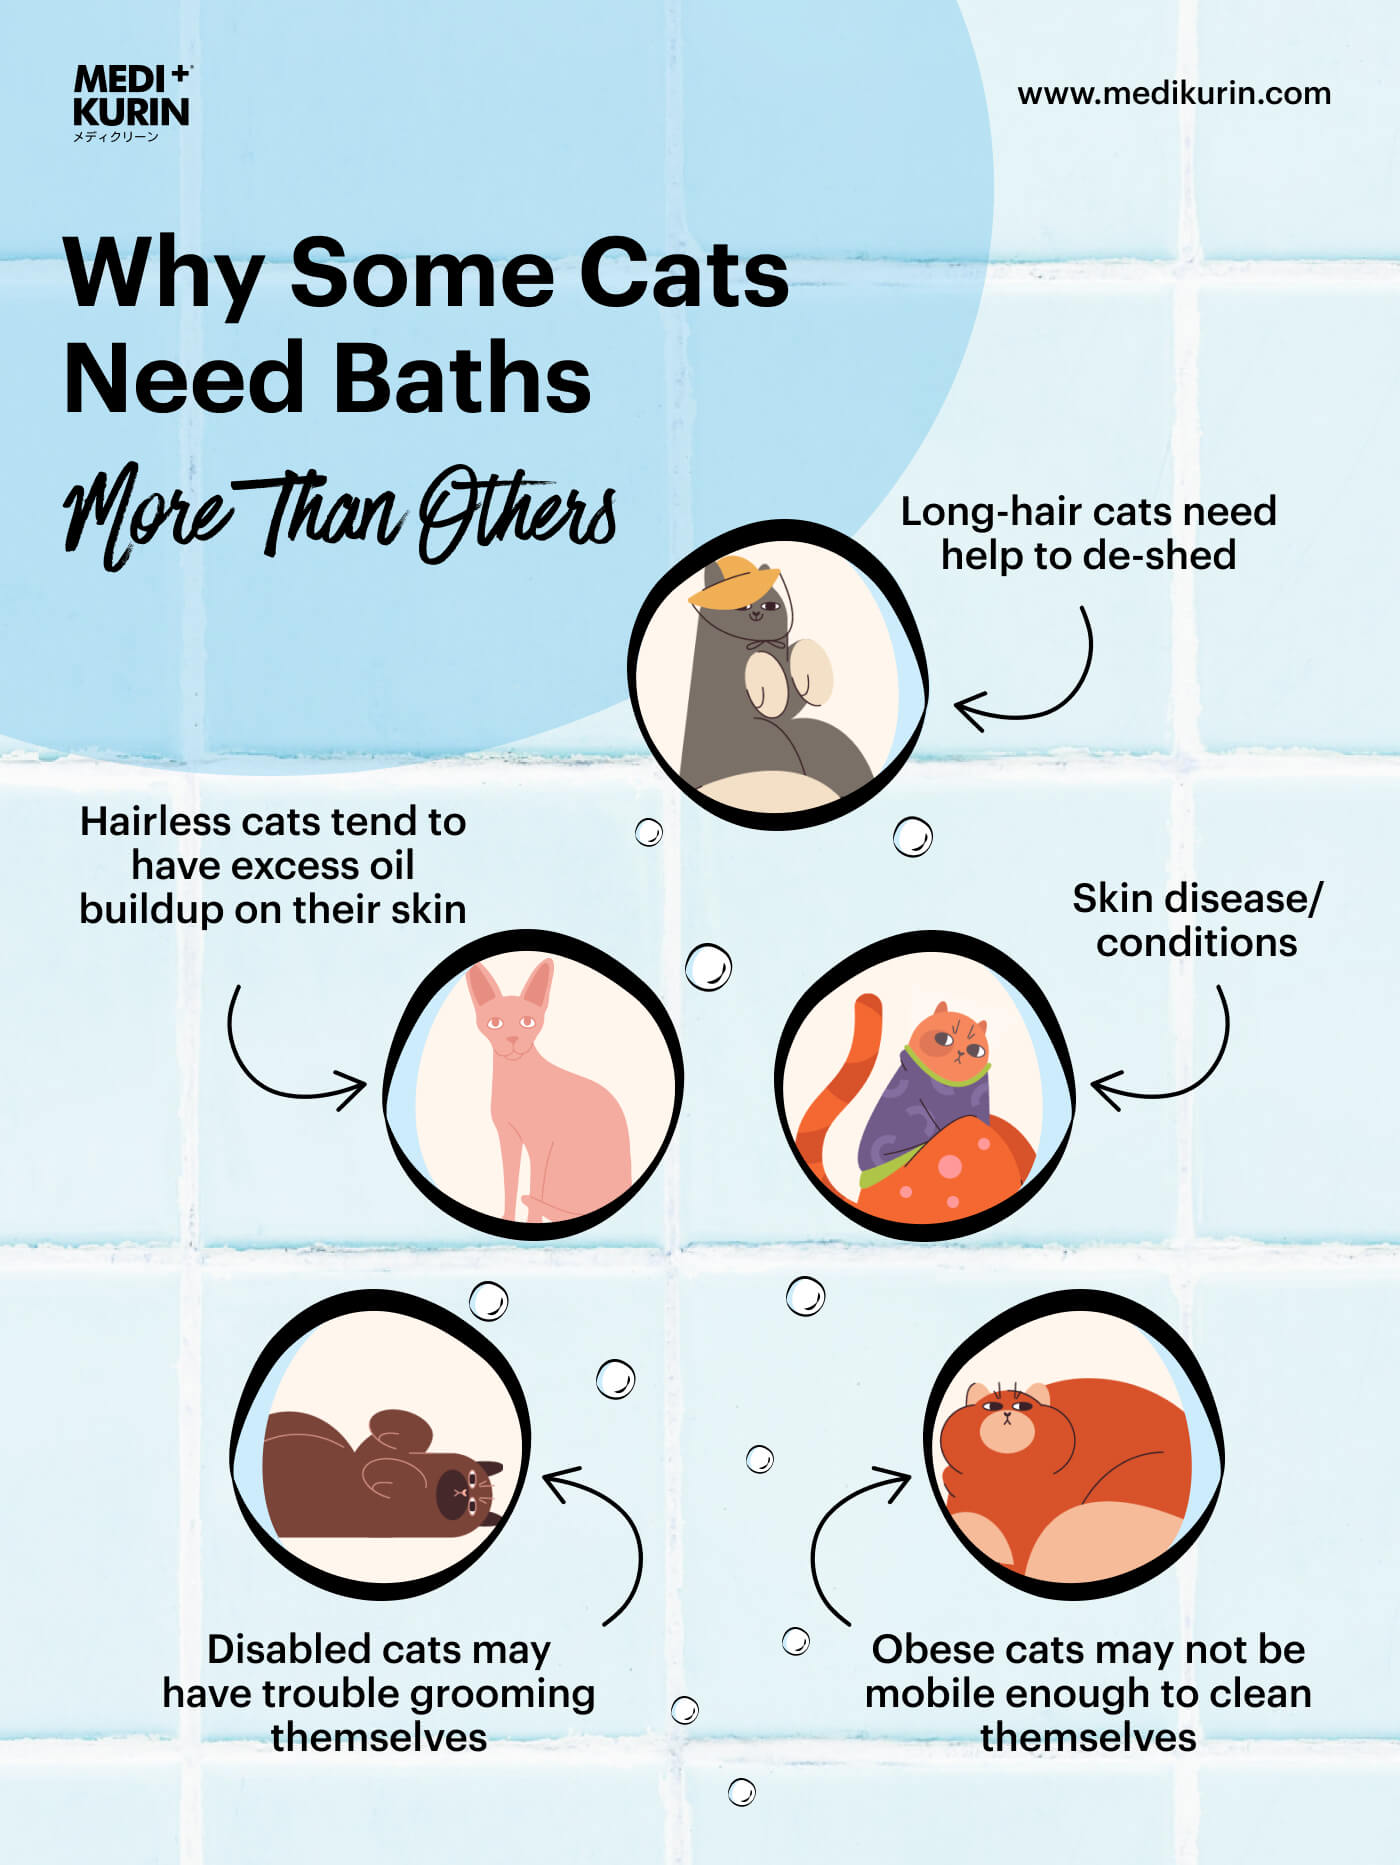 Why Some Cat's Breed need Baths More Than Others